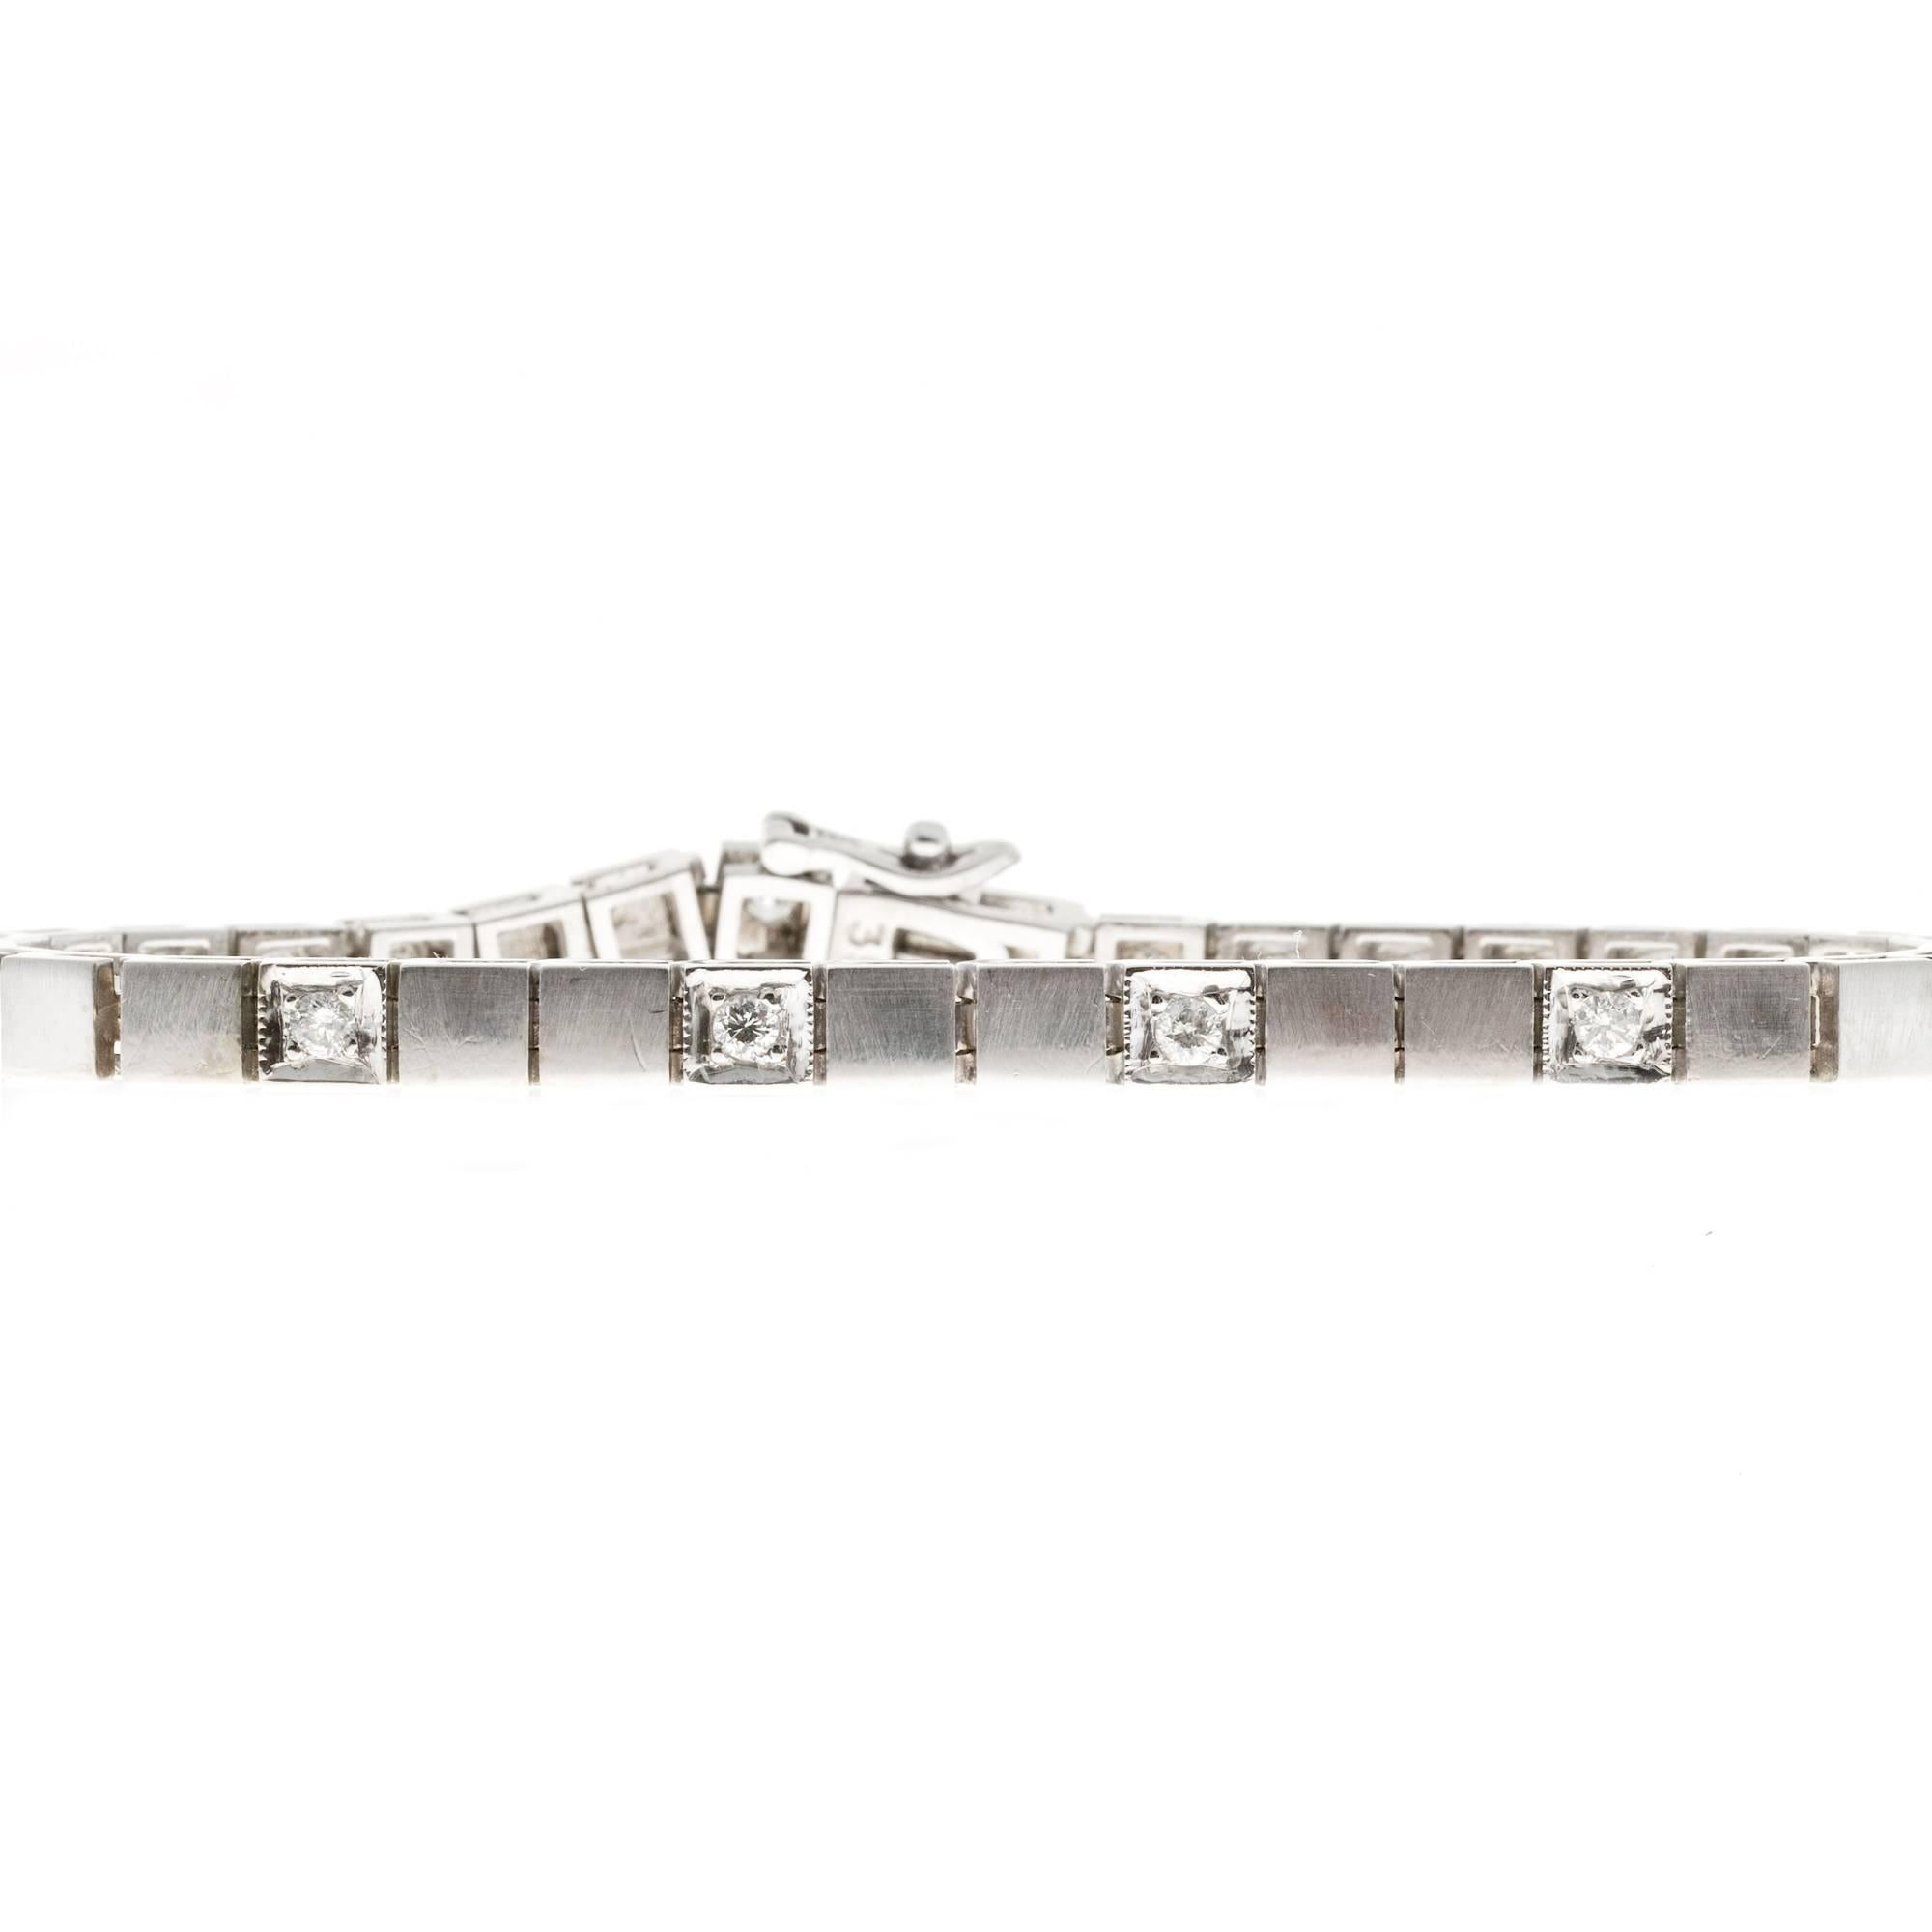 Hinged box link bracelet set every third link bead set with a bright sparkly full cut diamond. The tops of the links are brush finish. Circa 1950.

12 round full cut diamonds, approx. total weight .75cts, H, SI1
14k white gold
23.3 grams
Tested